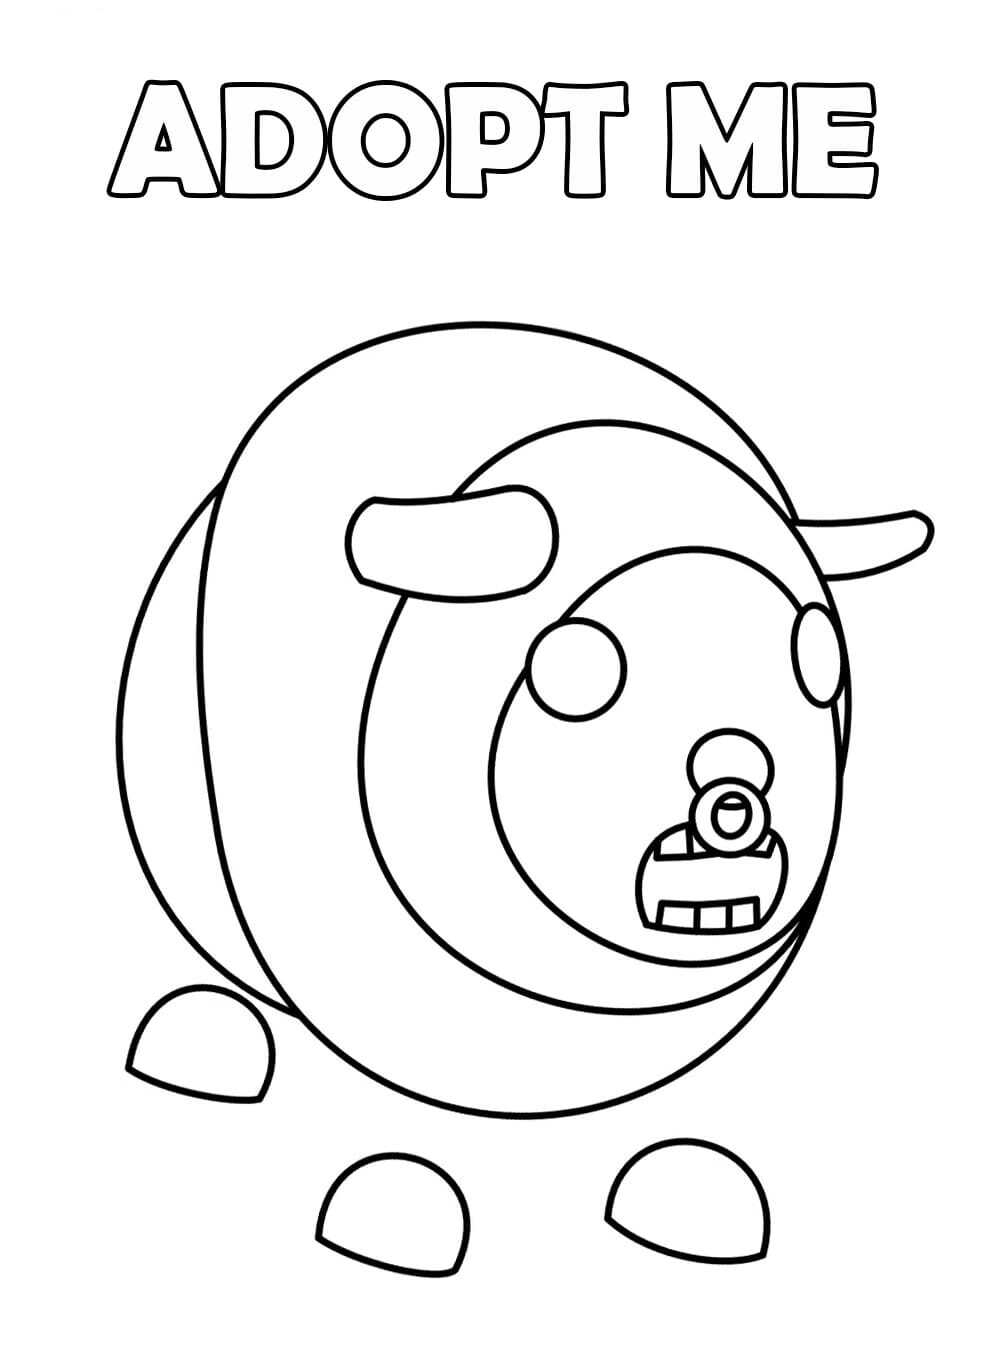 The Zombie Buffalo In Adopt Me Looks Like A Buffalo With A Ring On Its Nose Coloring Pages